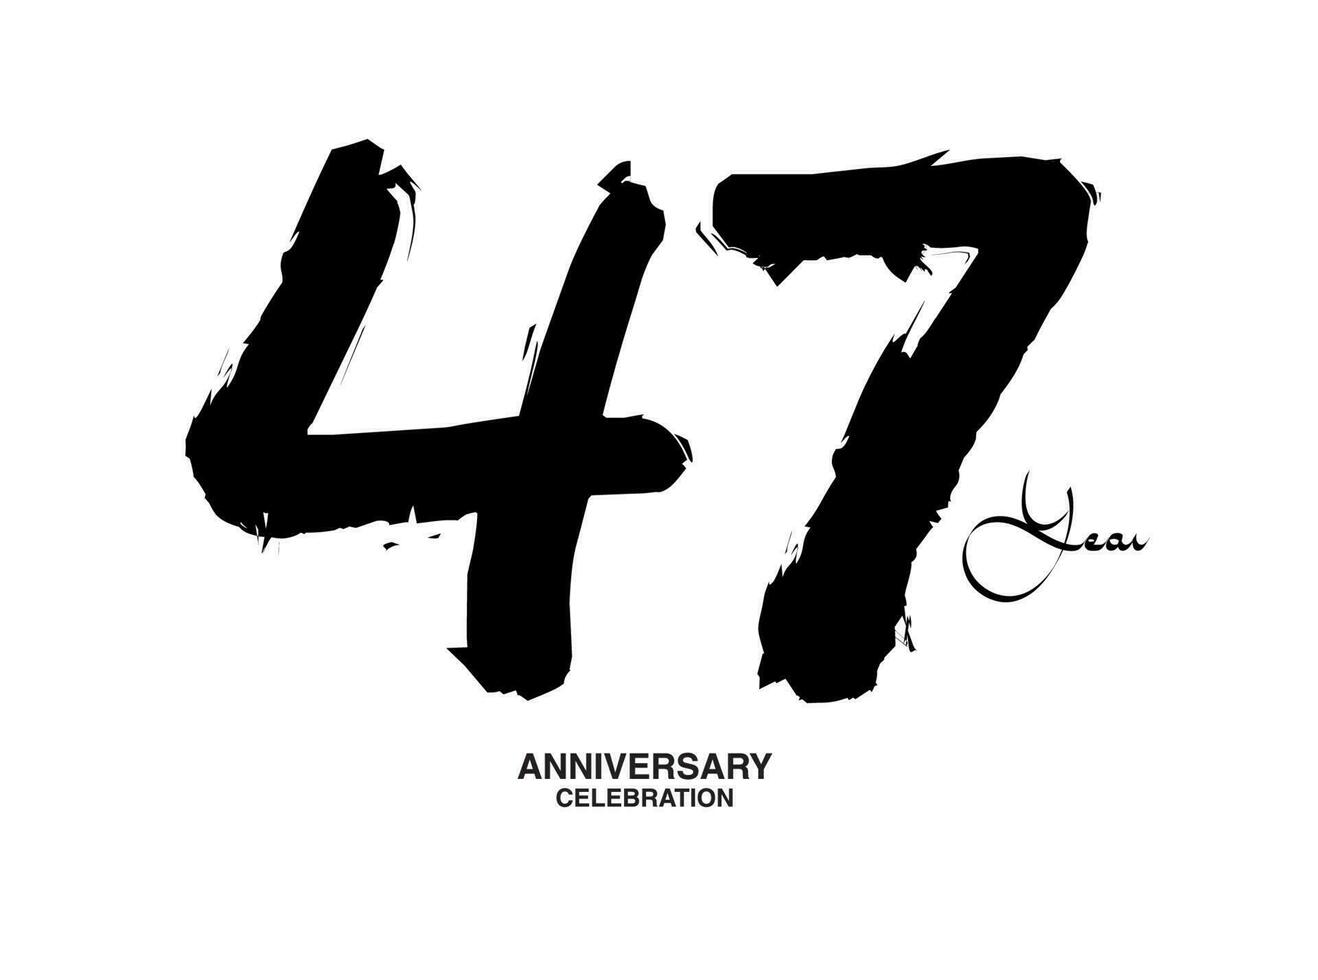 47 Years Anniversary Celebration Vector Template, 47 number logo design, 47th birthday, Black Lettering Numbers brush drawing hand drawn sketch, black number, Anniversary vector illustration